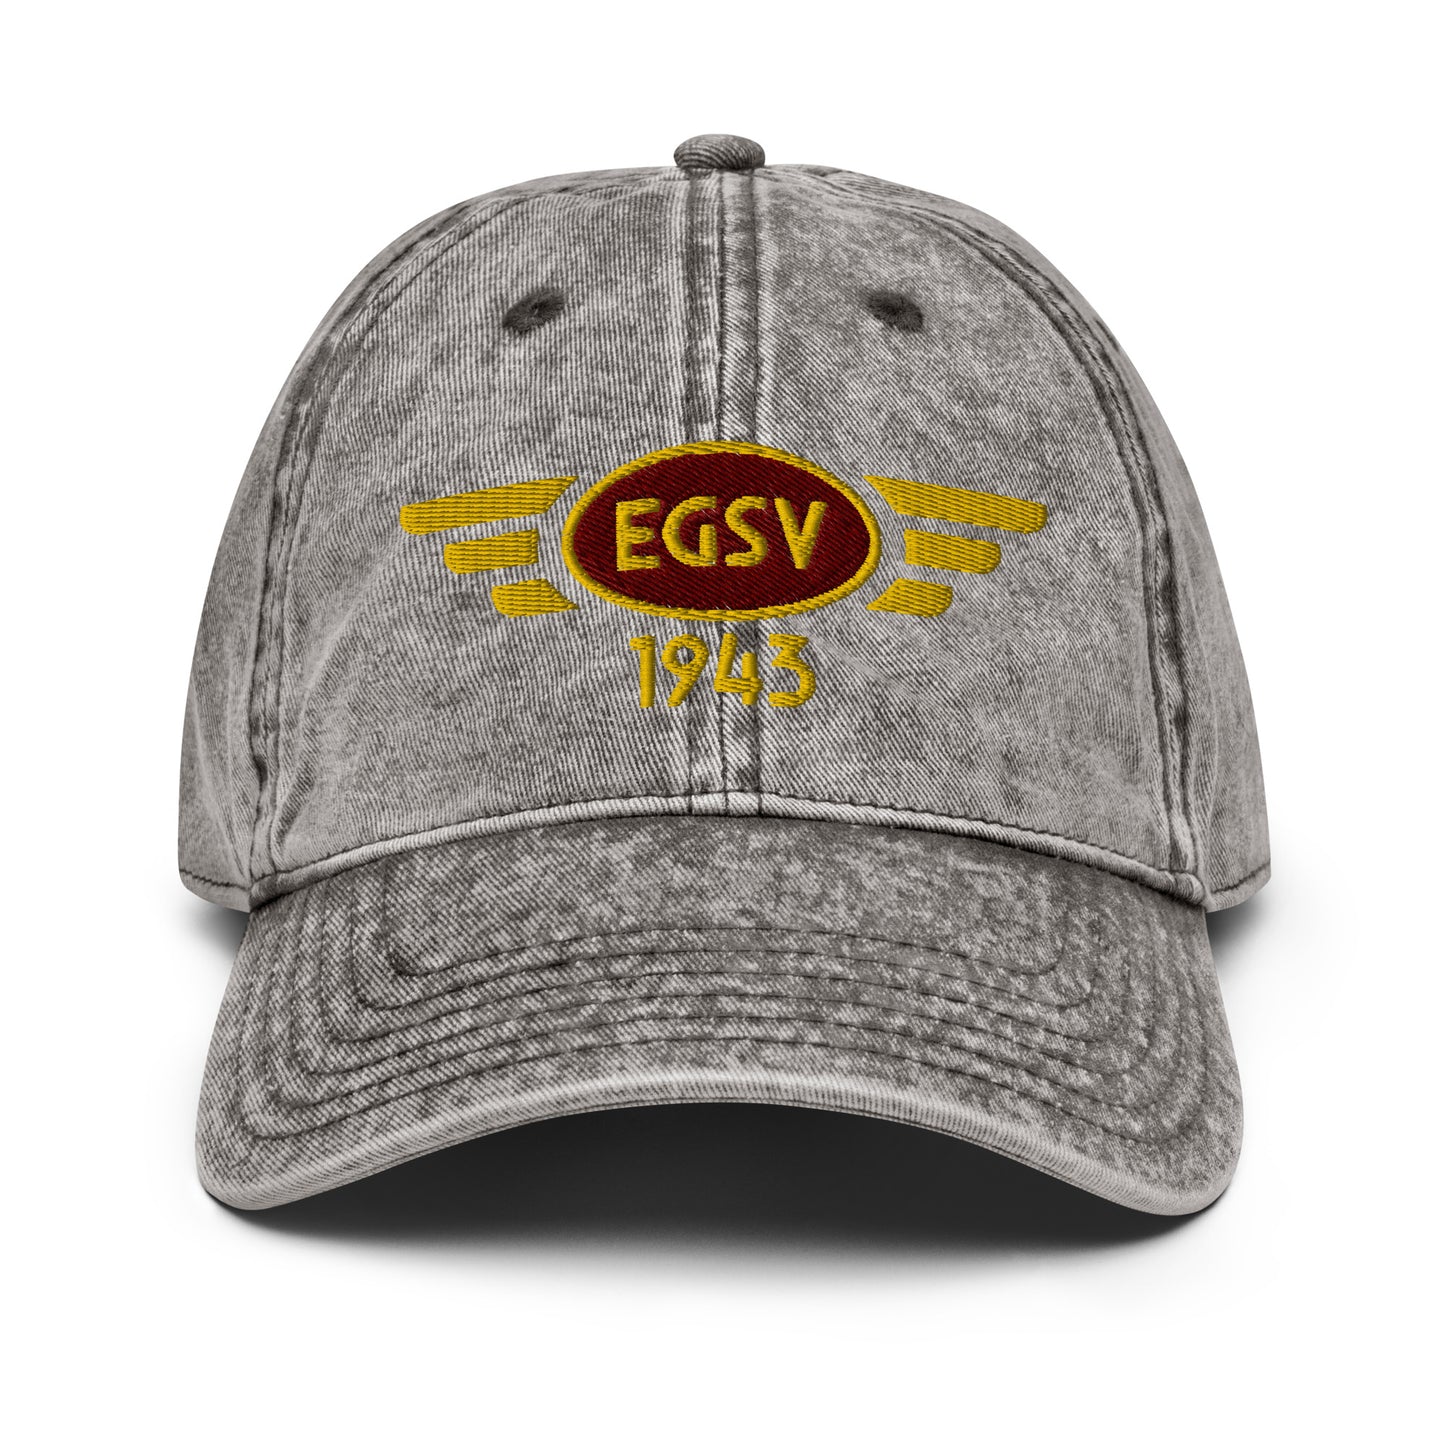 Charcoal gray coloured cotton twill baseball cap with embroidered vintage style aviation logo for Old Buckenham Airfield.